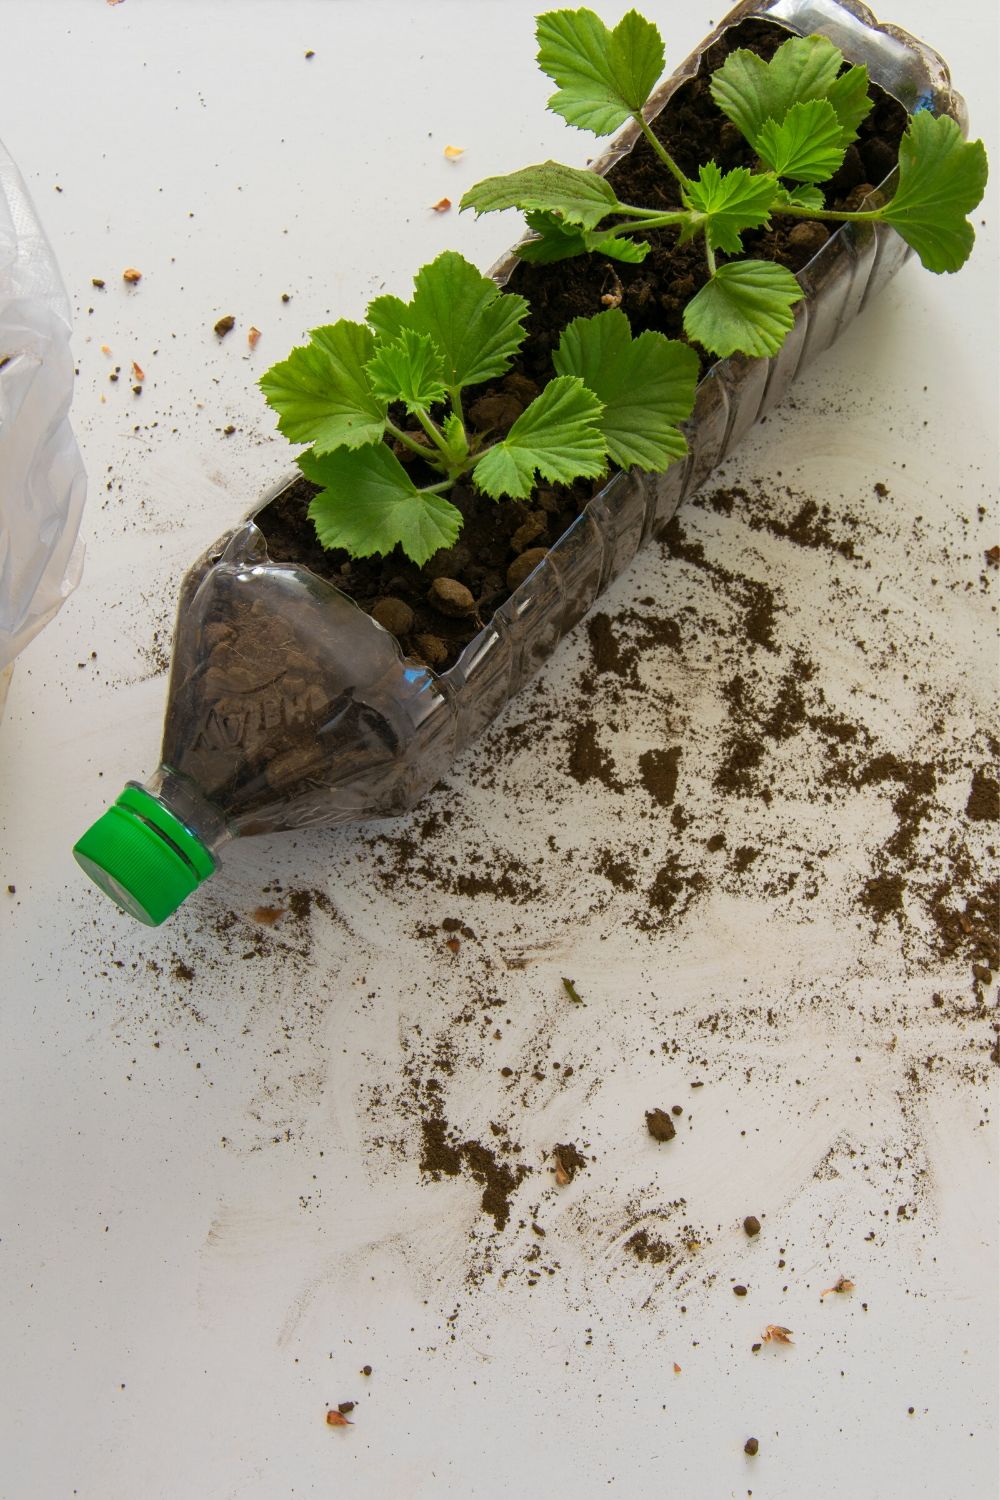 Rooting cuttings from geranium plants in the plastic bottle.